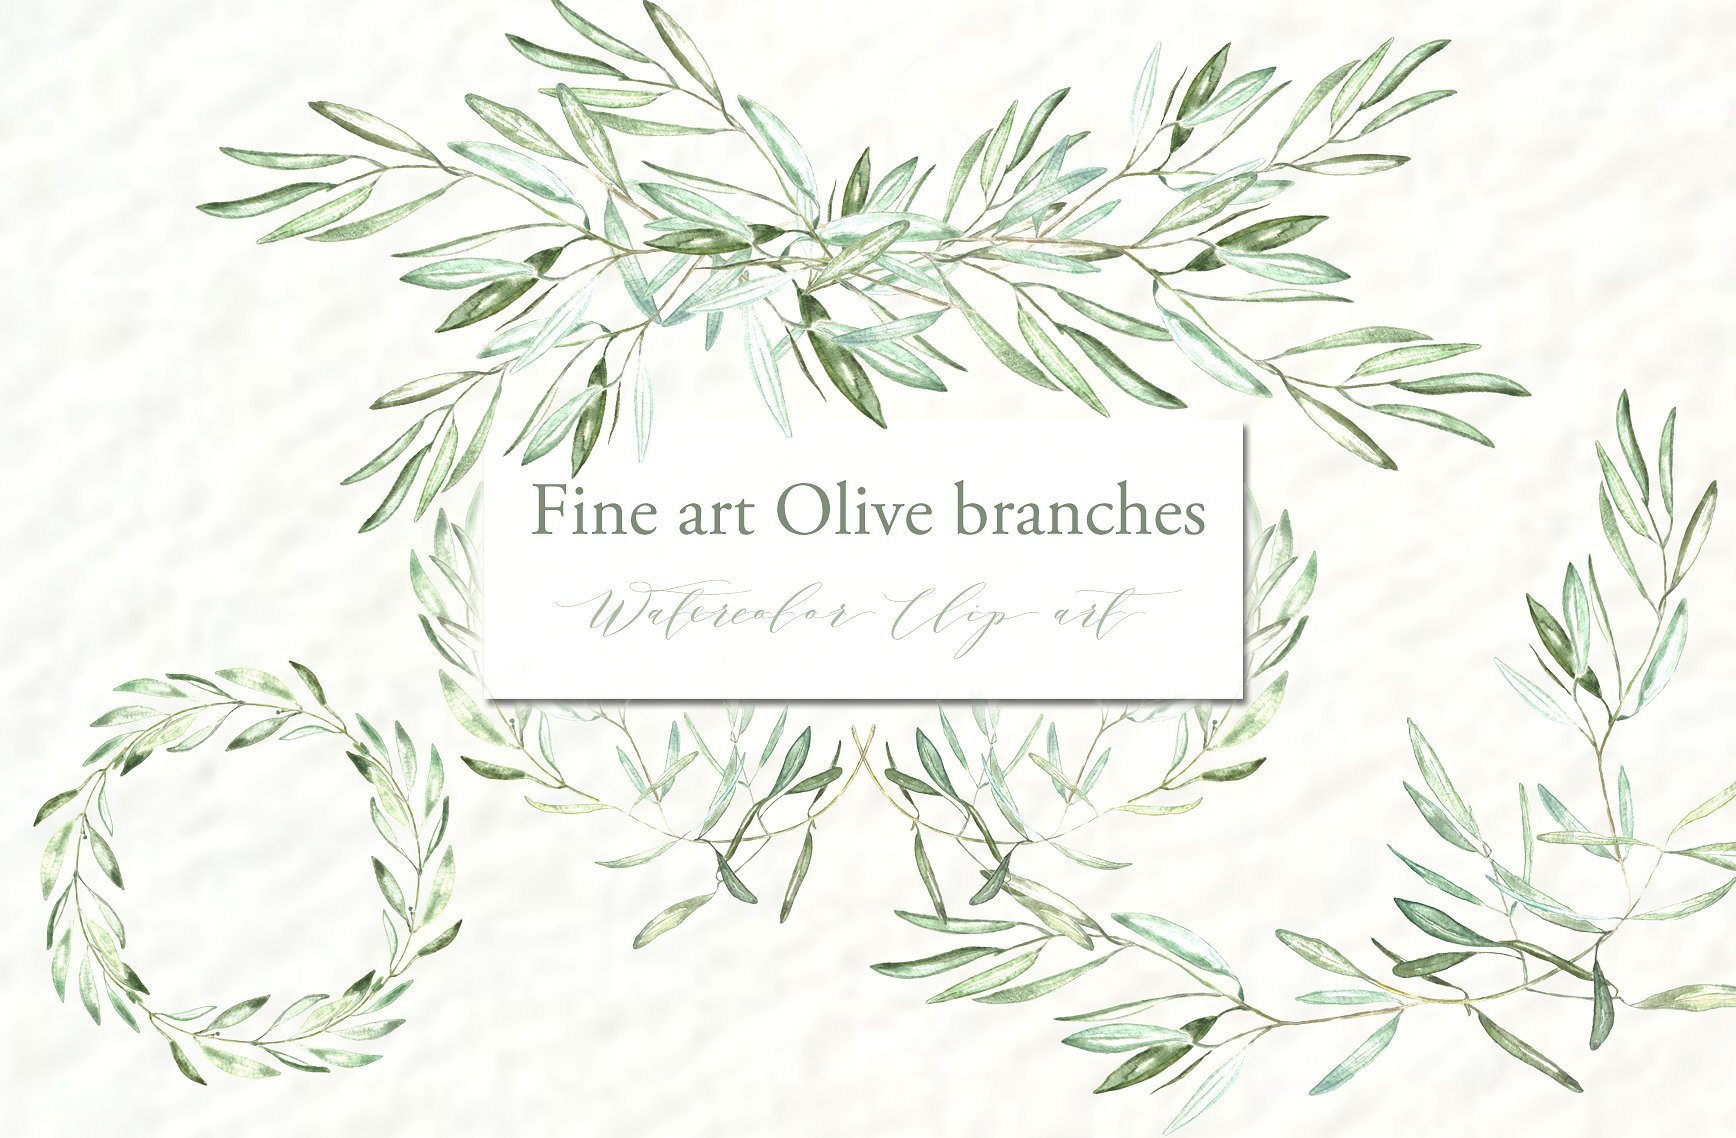 Olive branches. Fine art Water